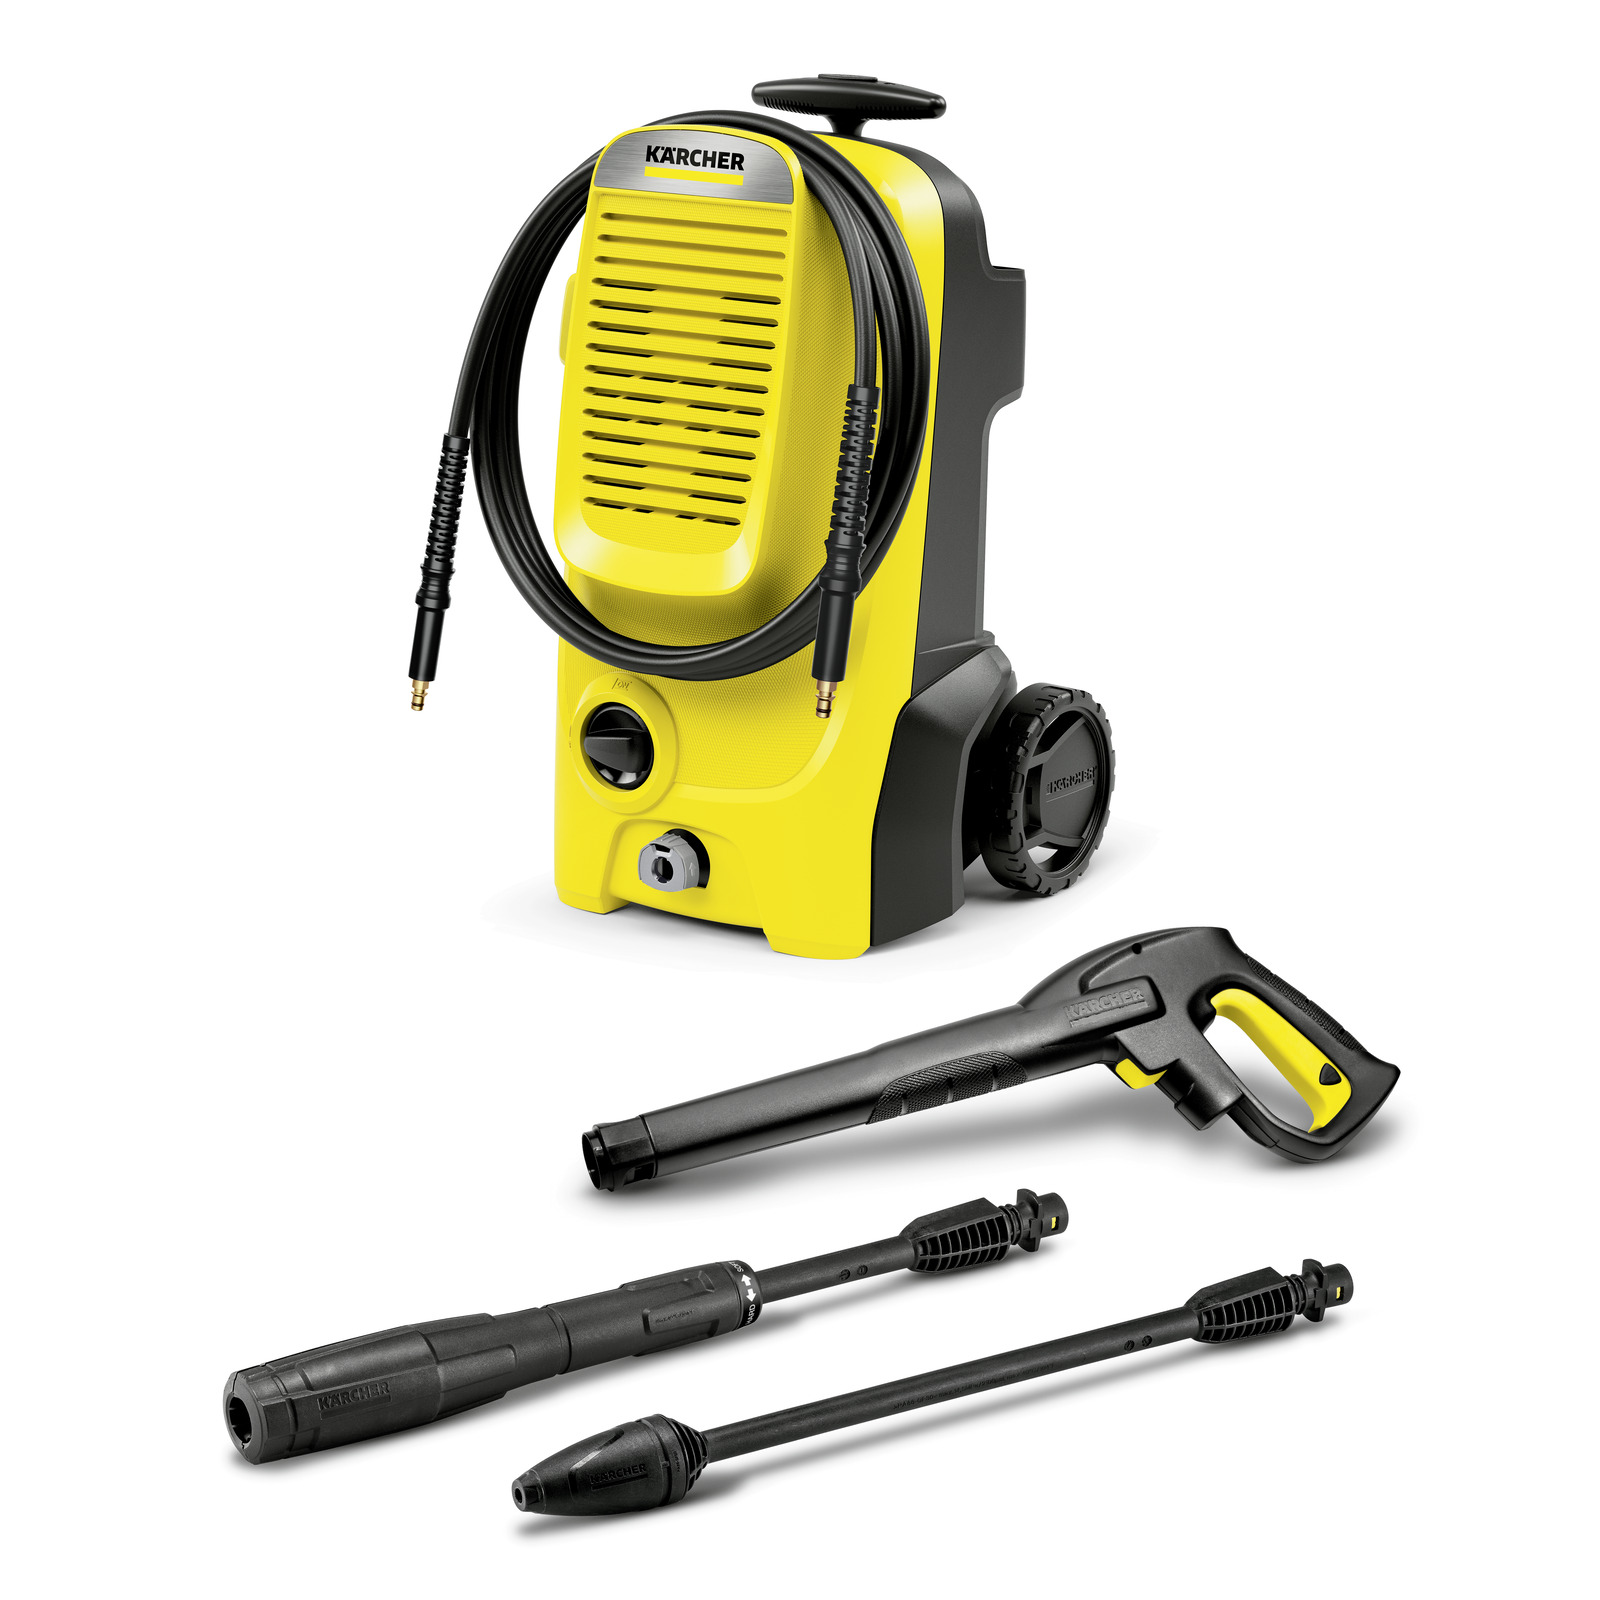 Karcher K2 Compact Pressure Washer - Buy Direct for just £89.99 from Karcher  Center